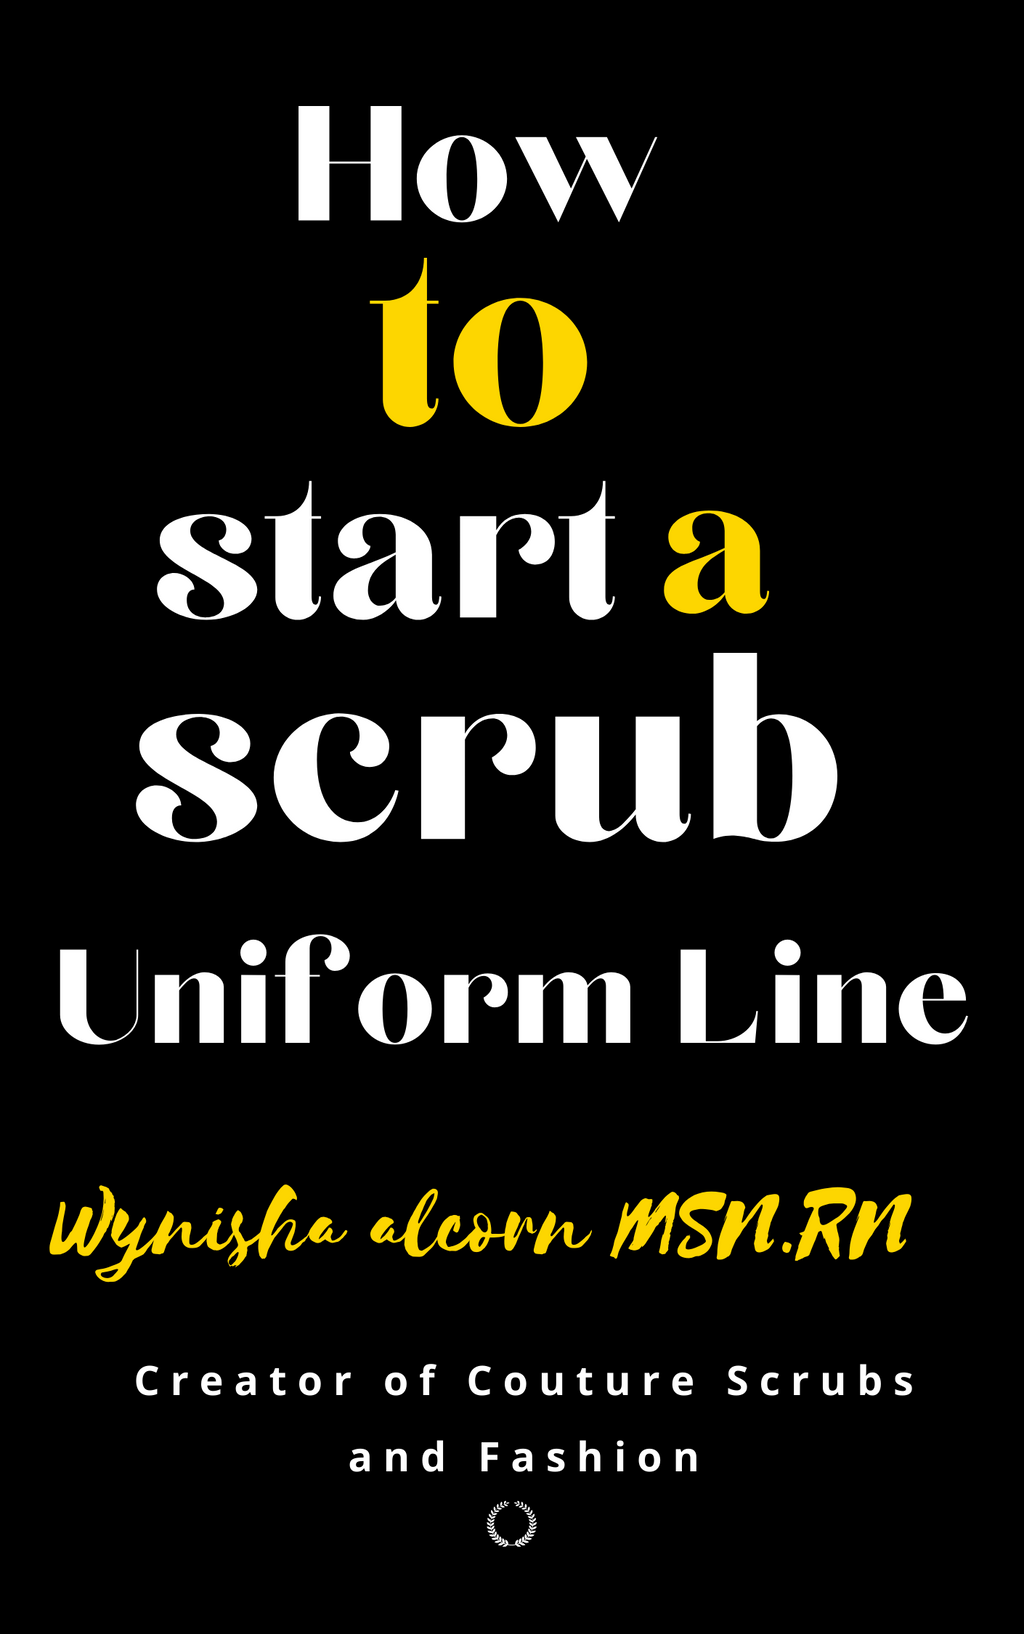 eBook on &quot;How to start your scrub/uniform line&quot;